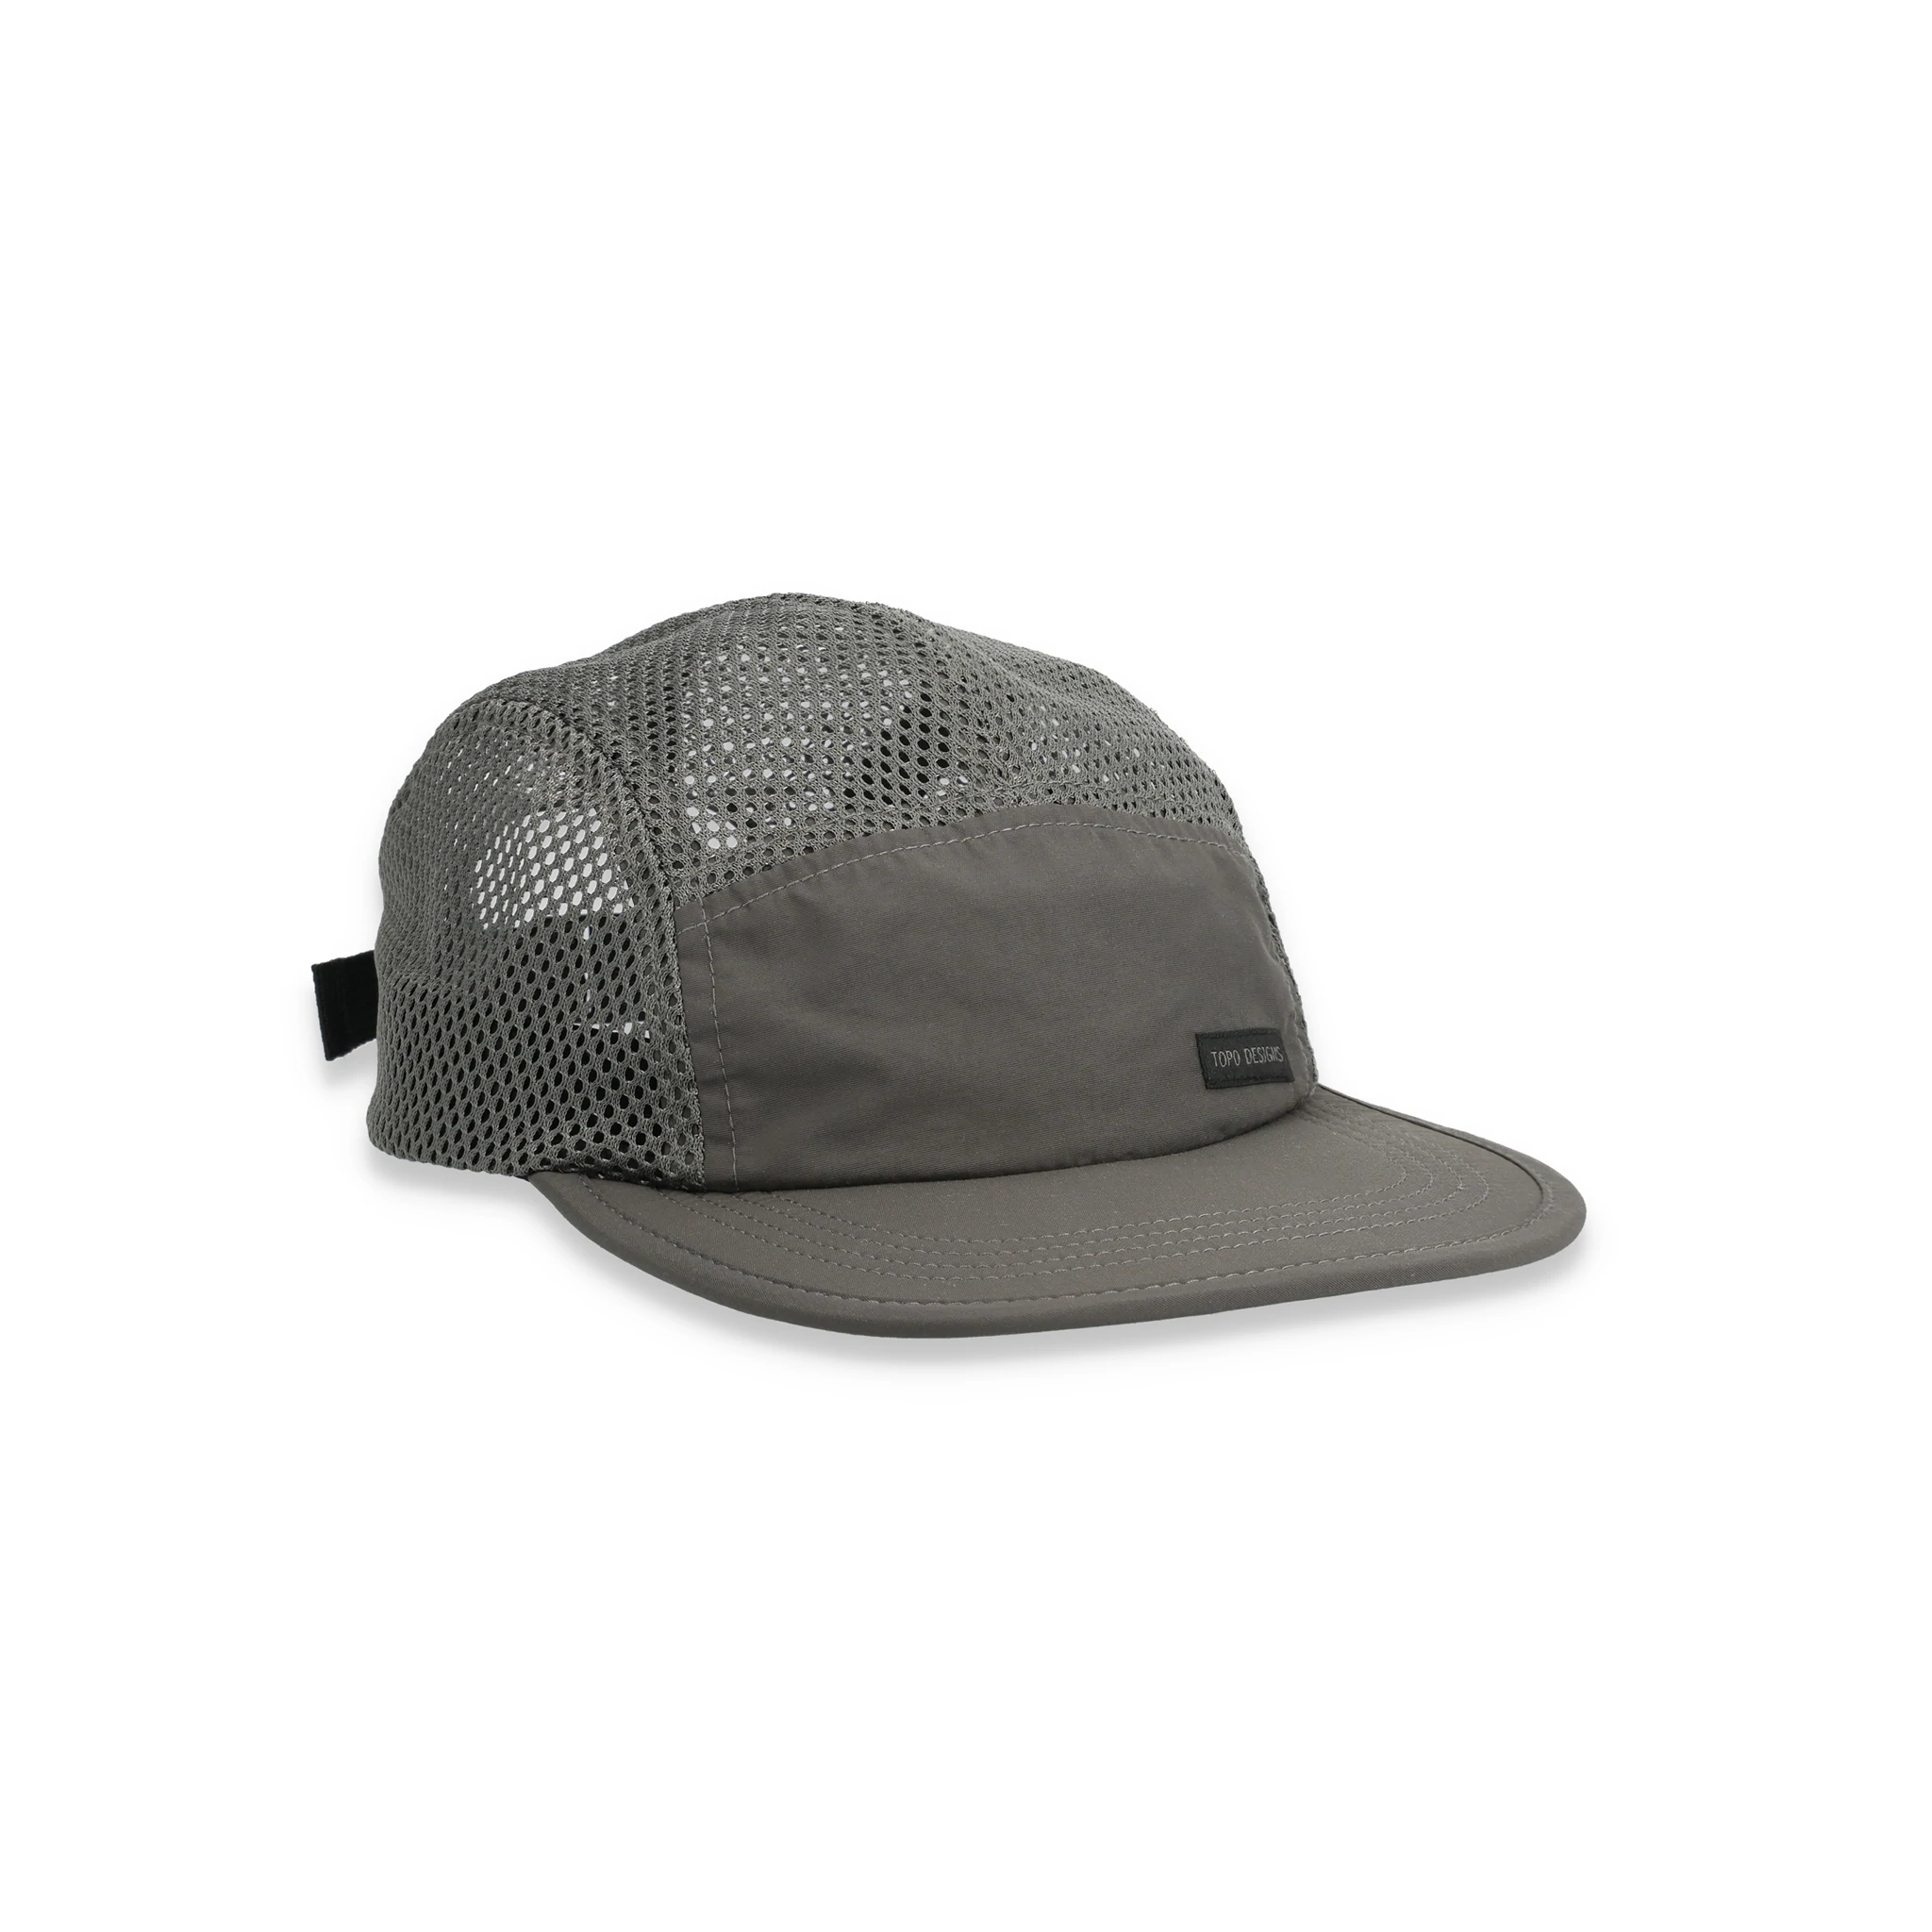 Topo Designs Global Hat - Charcoal - One Size - Unisex